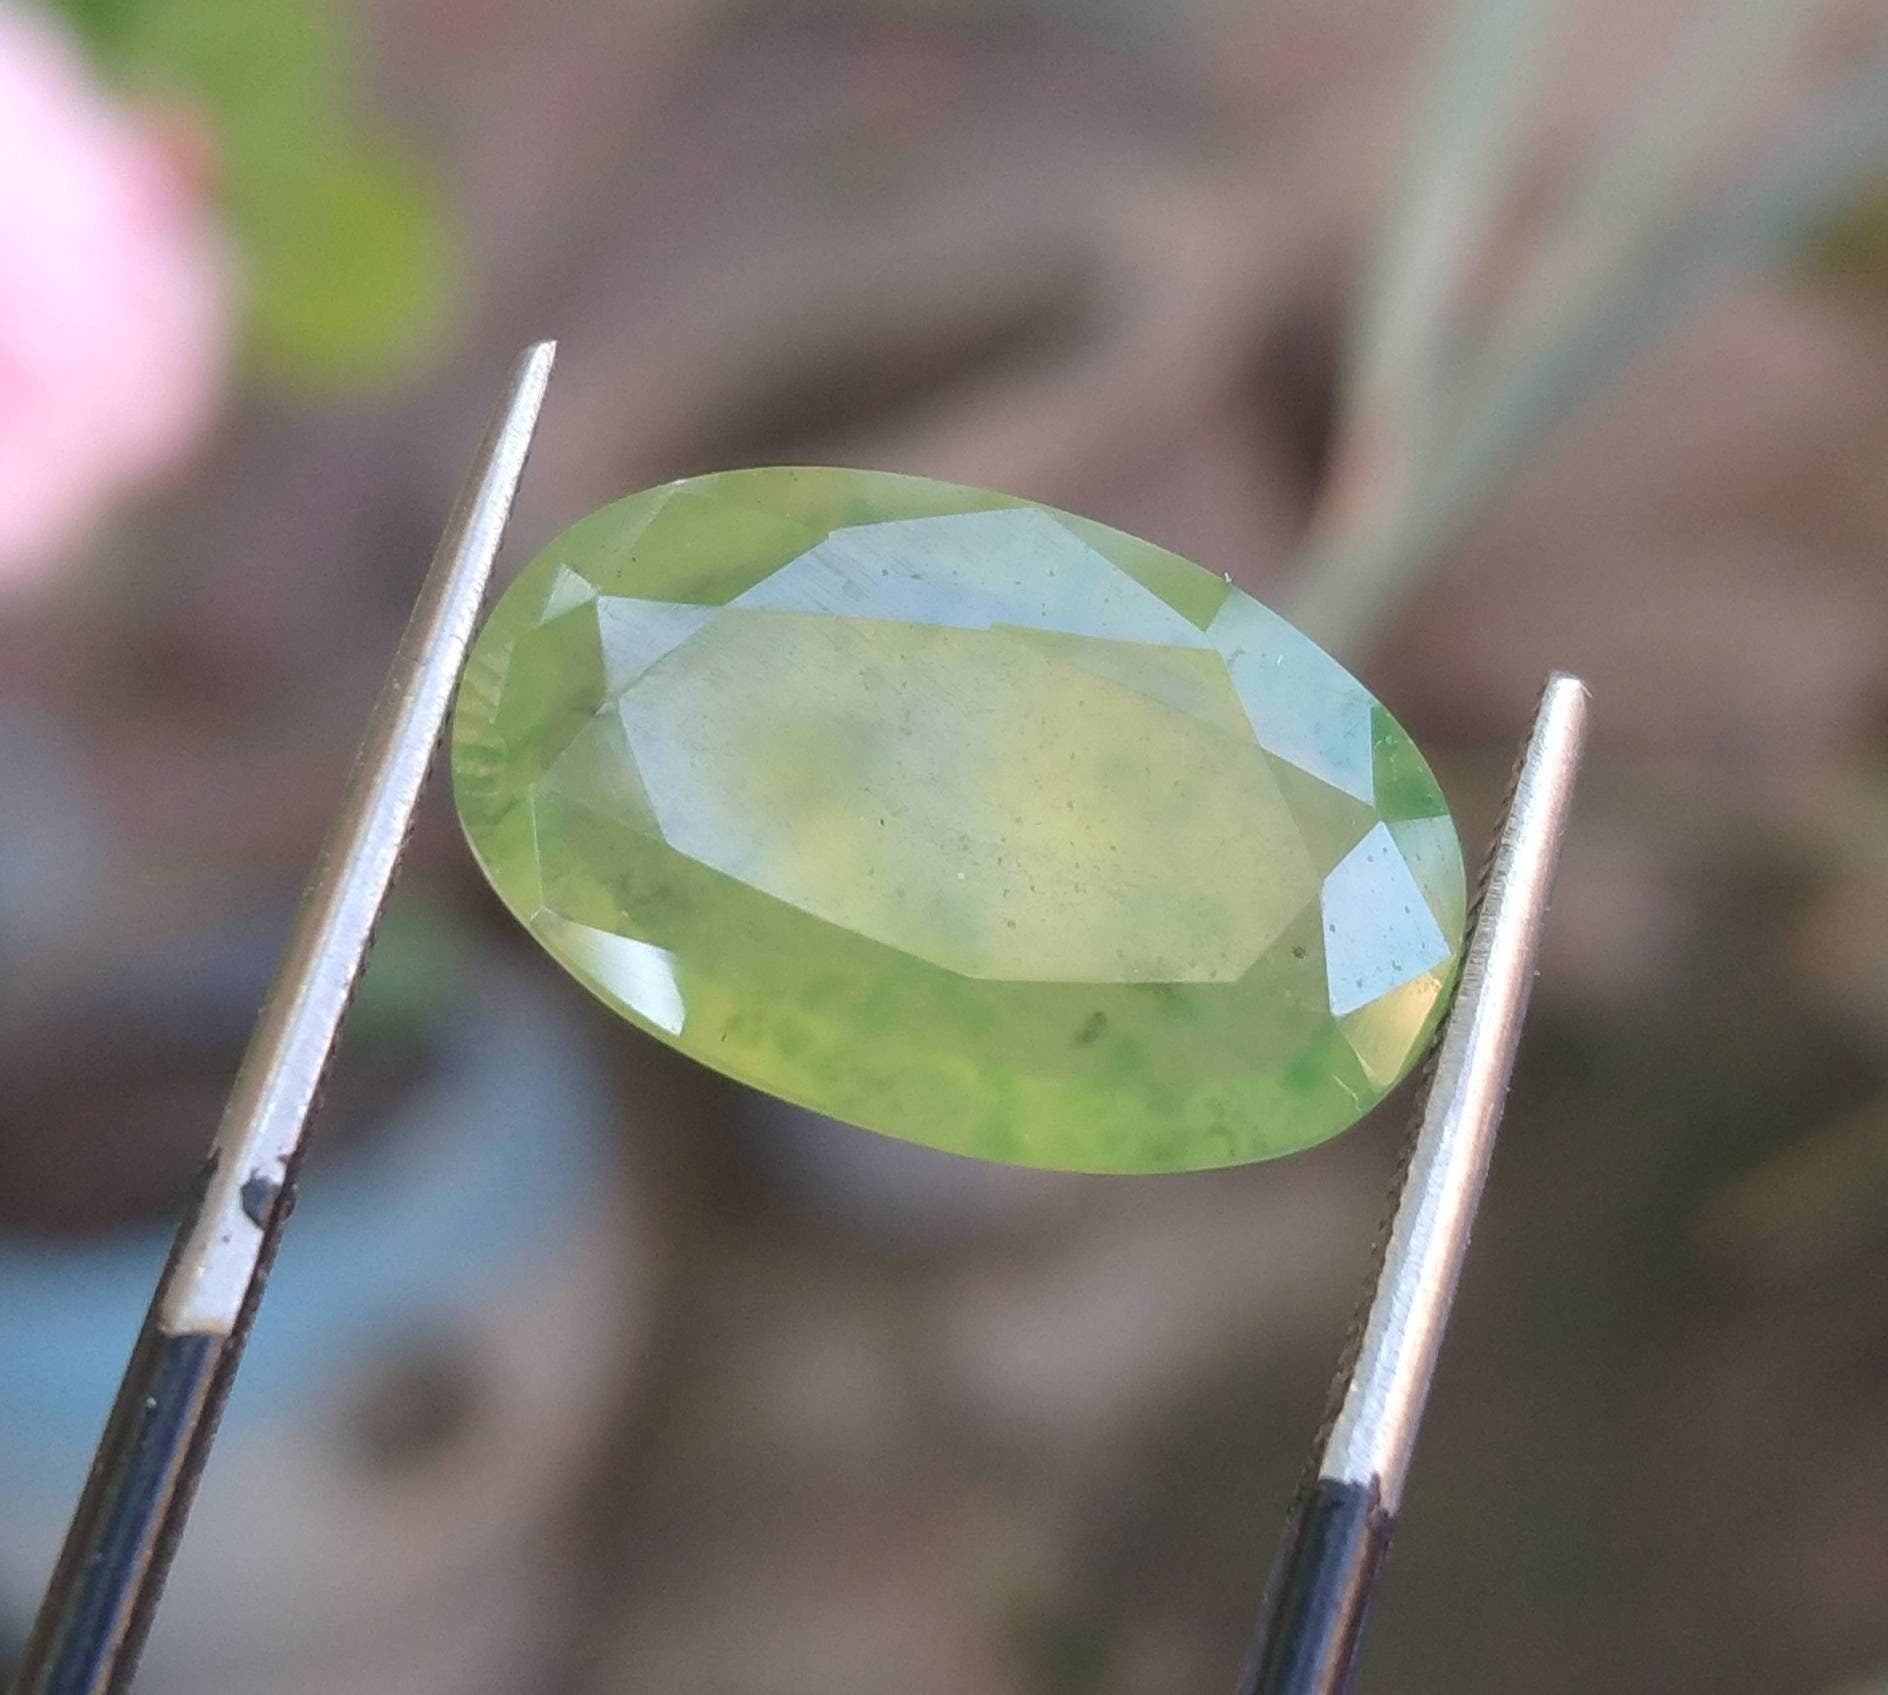 ARSAA GEMS AND MINERALSNatural top quality beautiful 7 carat oval shape faceted green hydrograssular garnet gem - Premium  from ARSAA GEMS AND MINERALS - Just $14.00! Shop now at ARSAA GEMS AND MINERALS